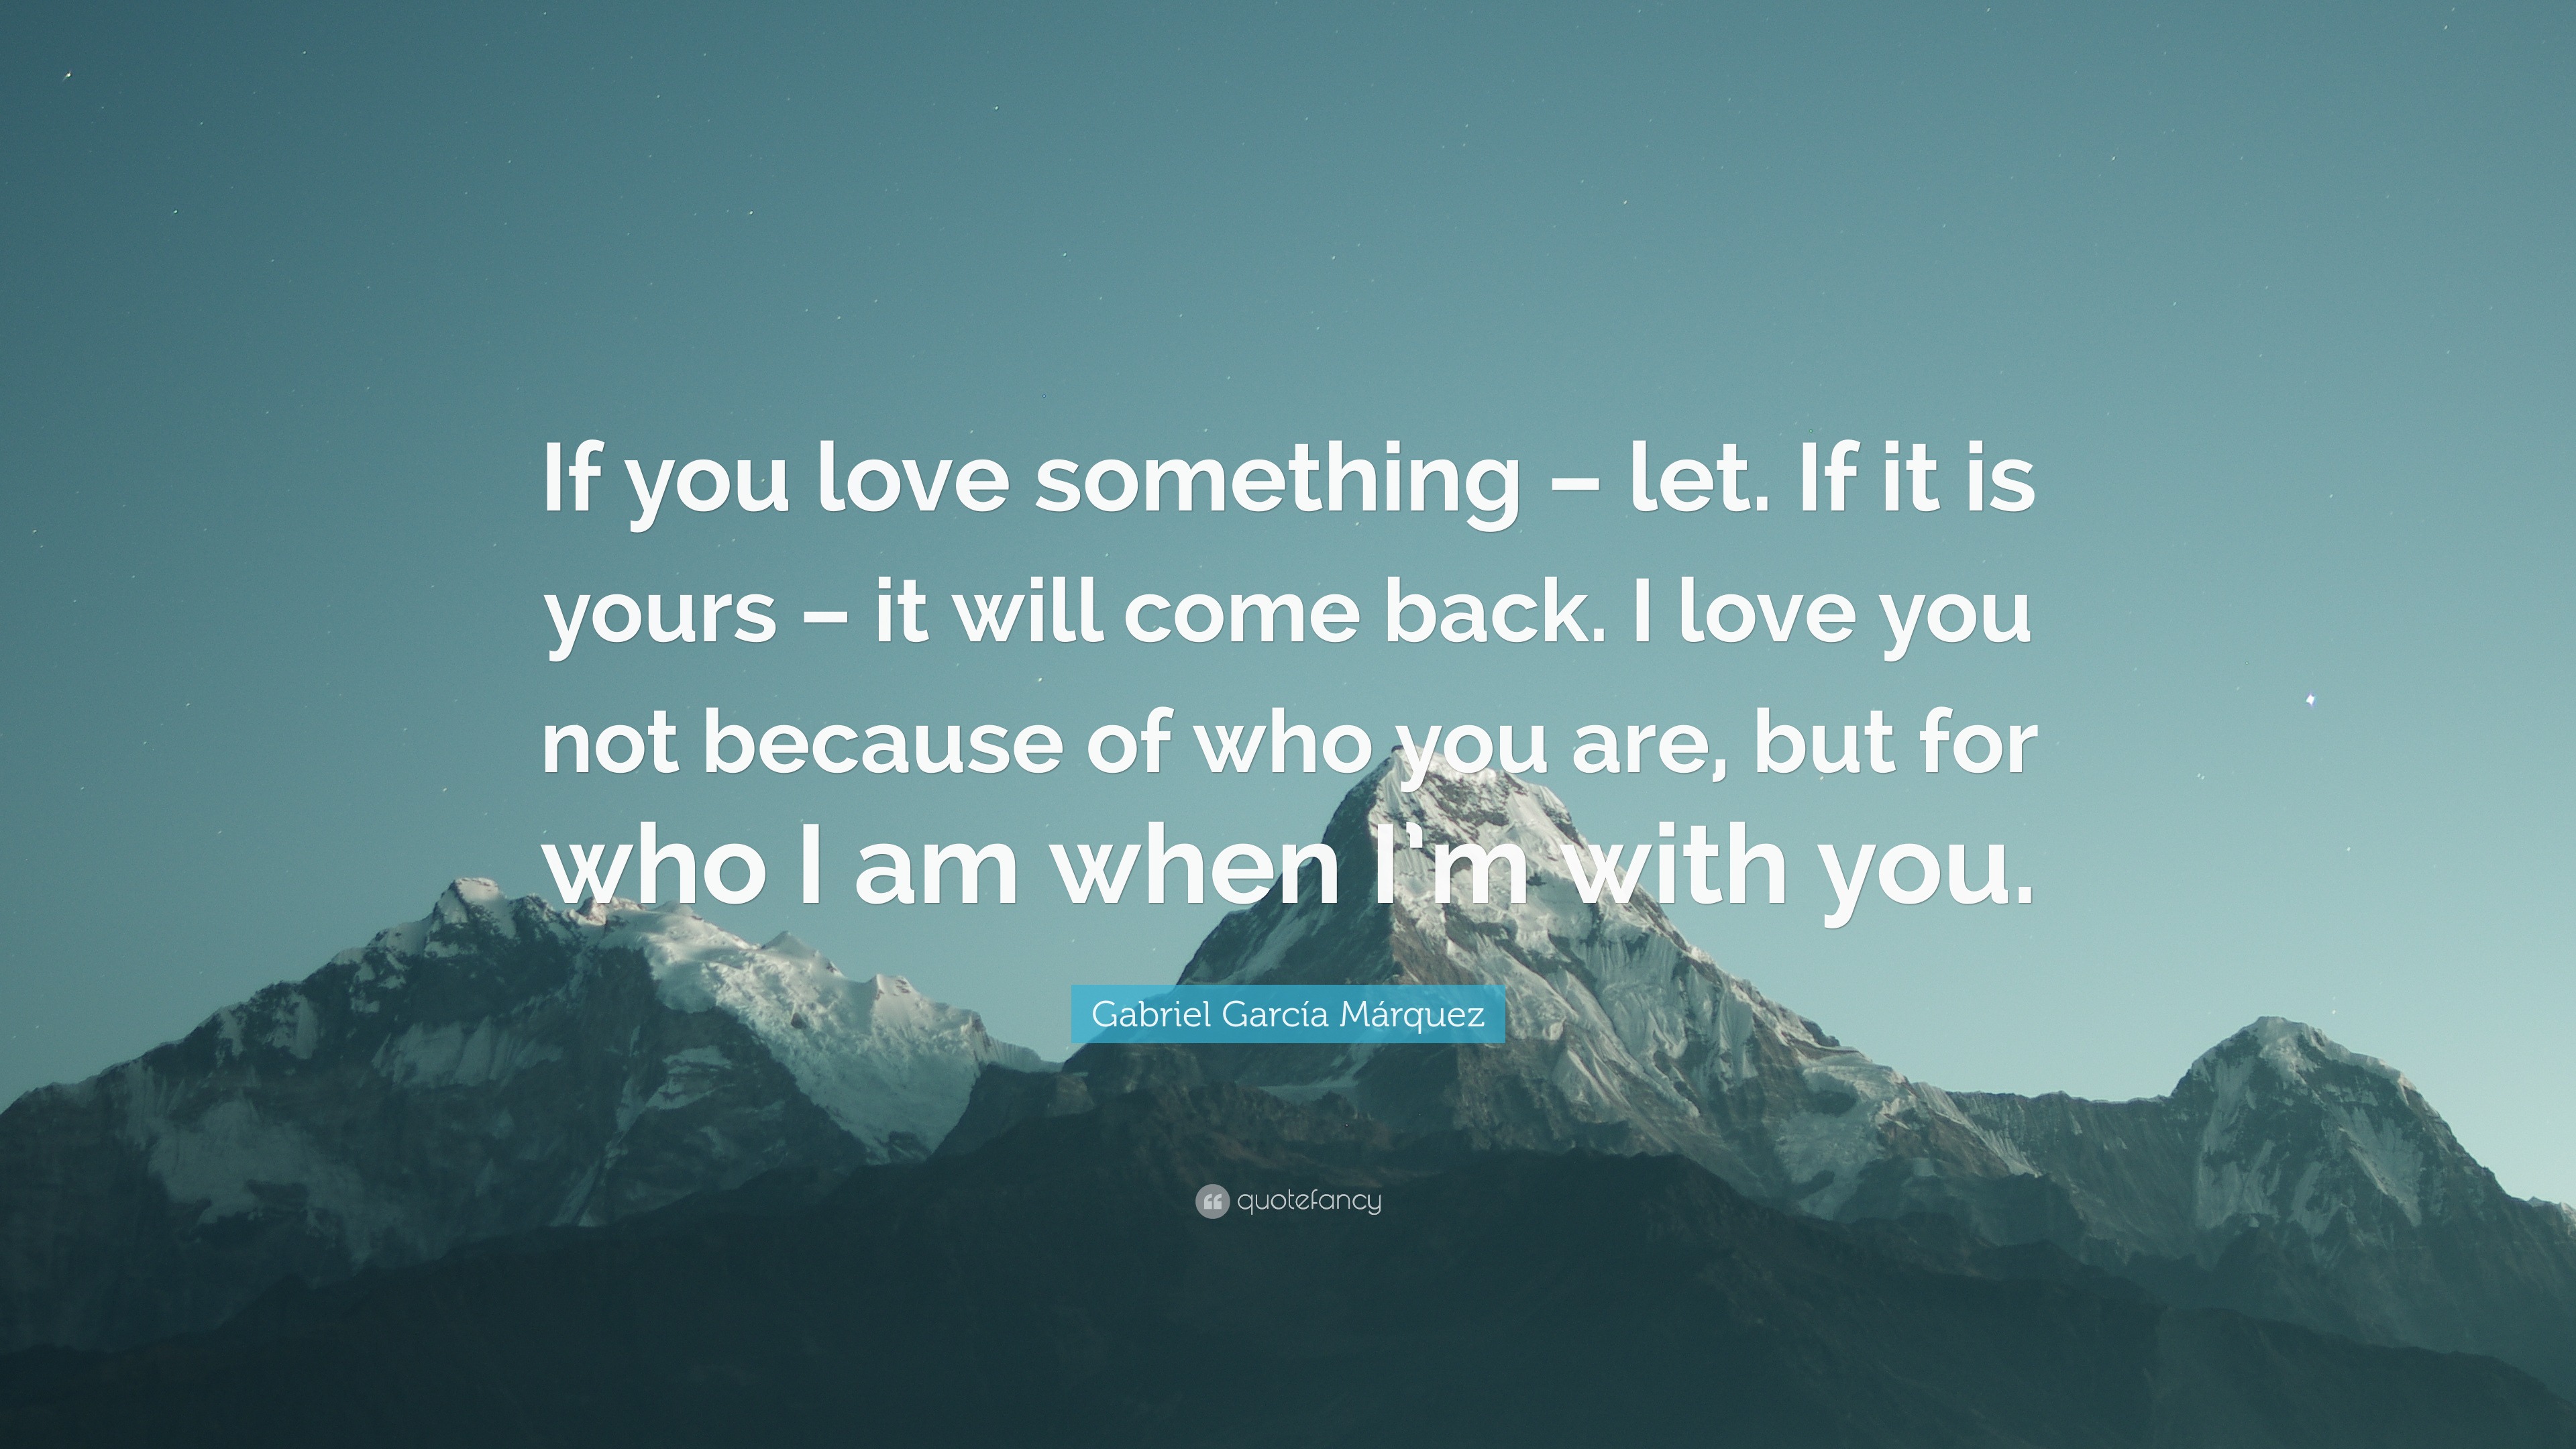 Gabriel Garc­a Márquez Quote “If you love something – let If it is